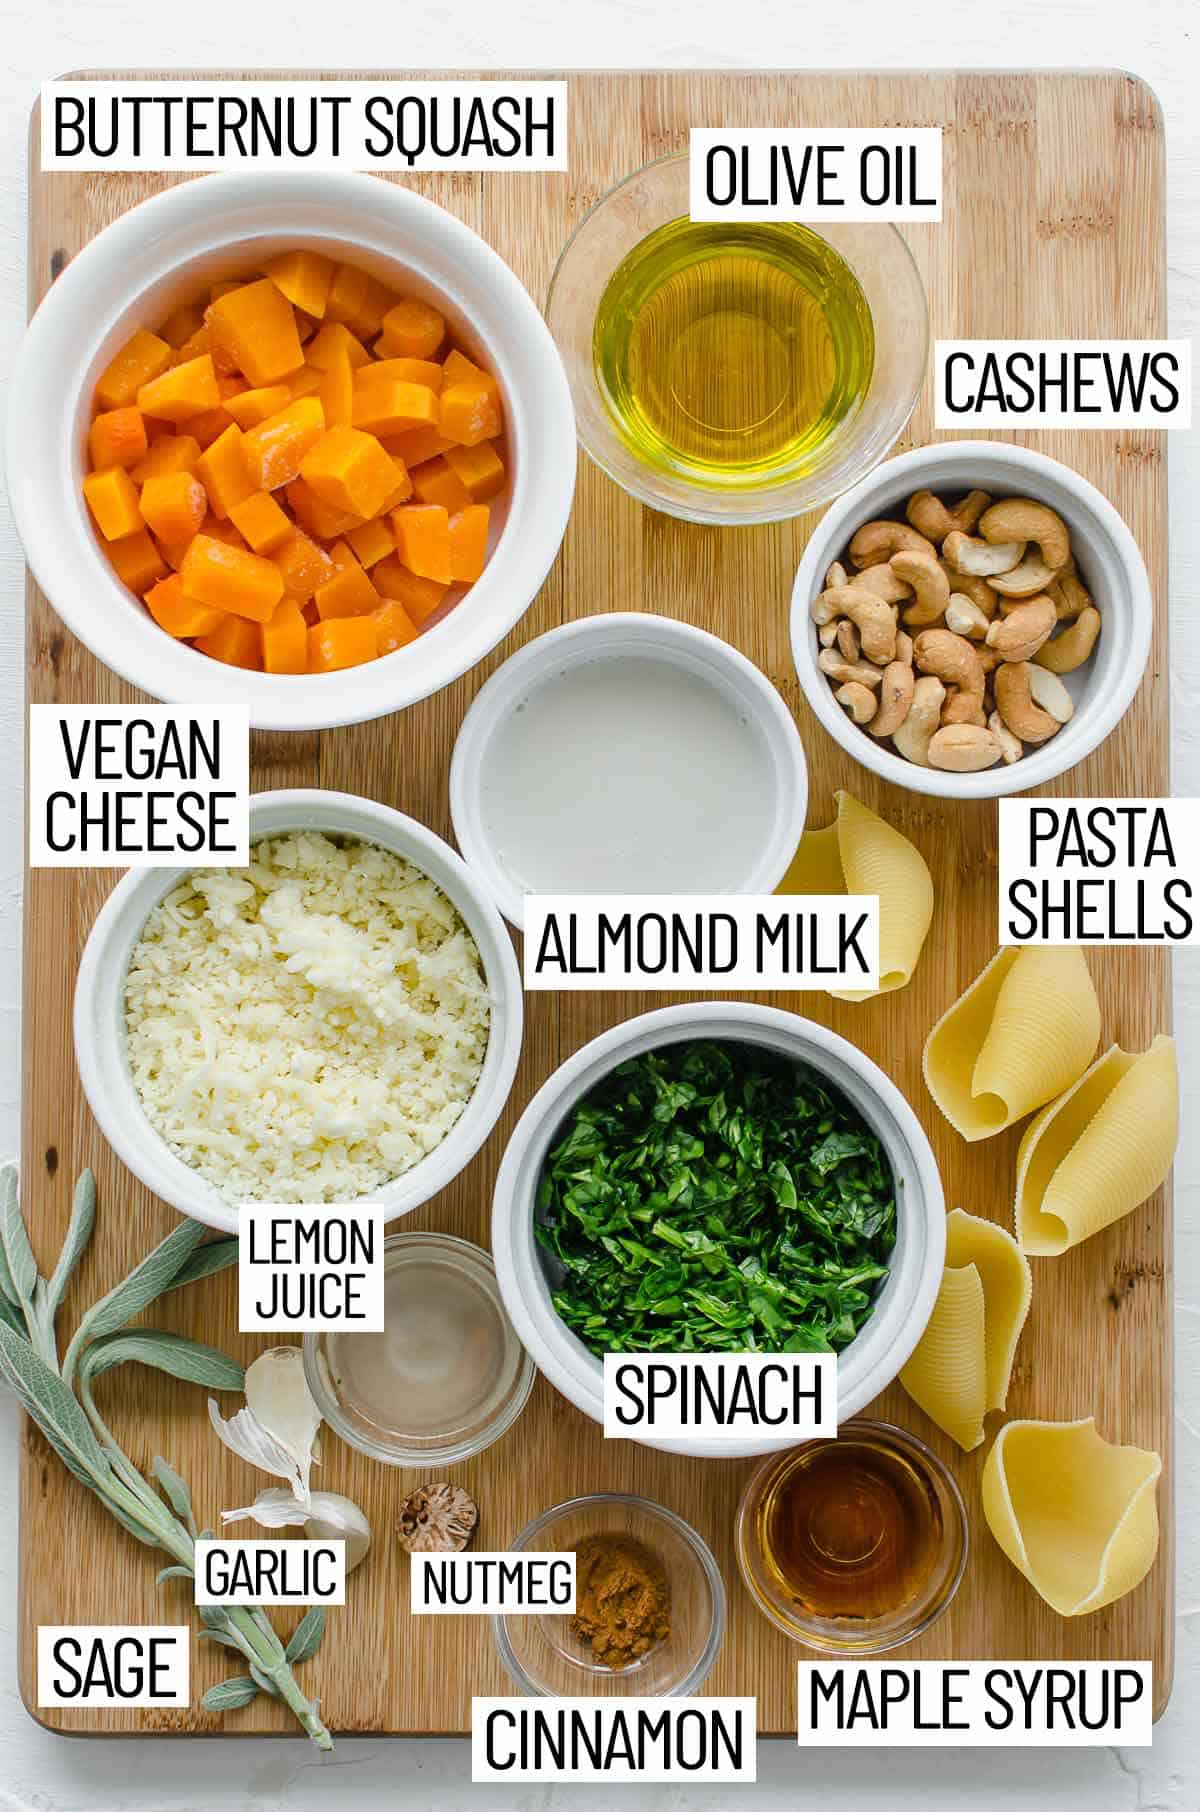 Overhead image of ingredients for stuffed shells including butternut squash, olive oil, cashews, pasta shells, almond milk, vegan cheese, lemon juice, spinach, maple syrup, cinnamon, nutmeg, garlic, and sage.